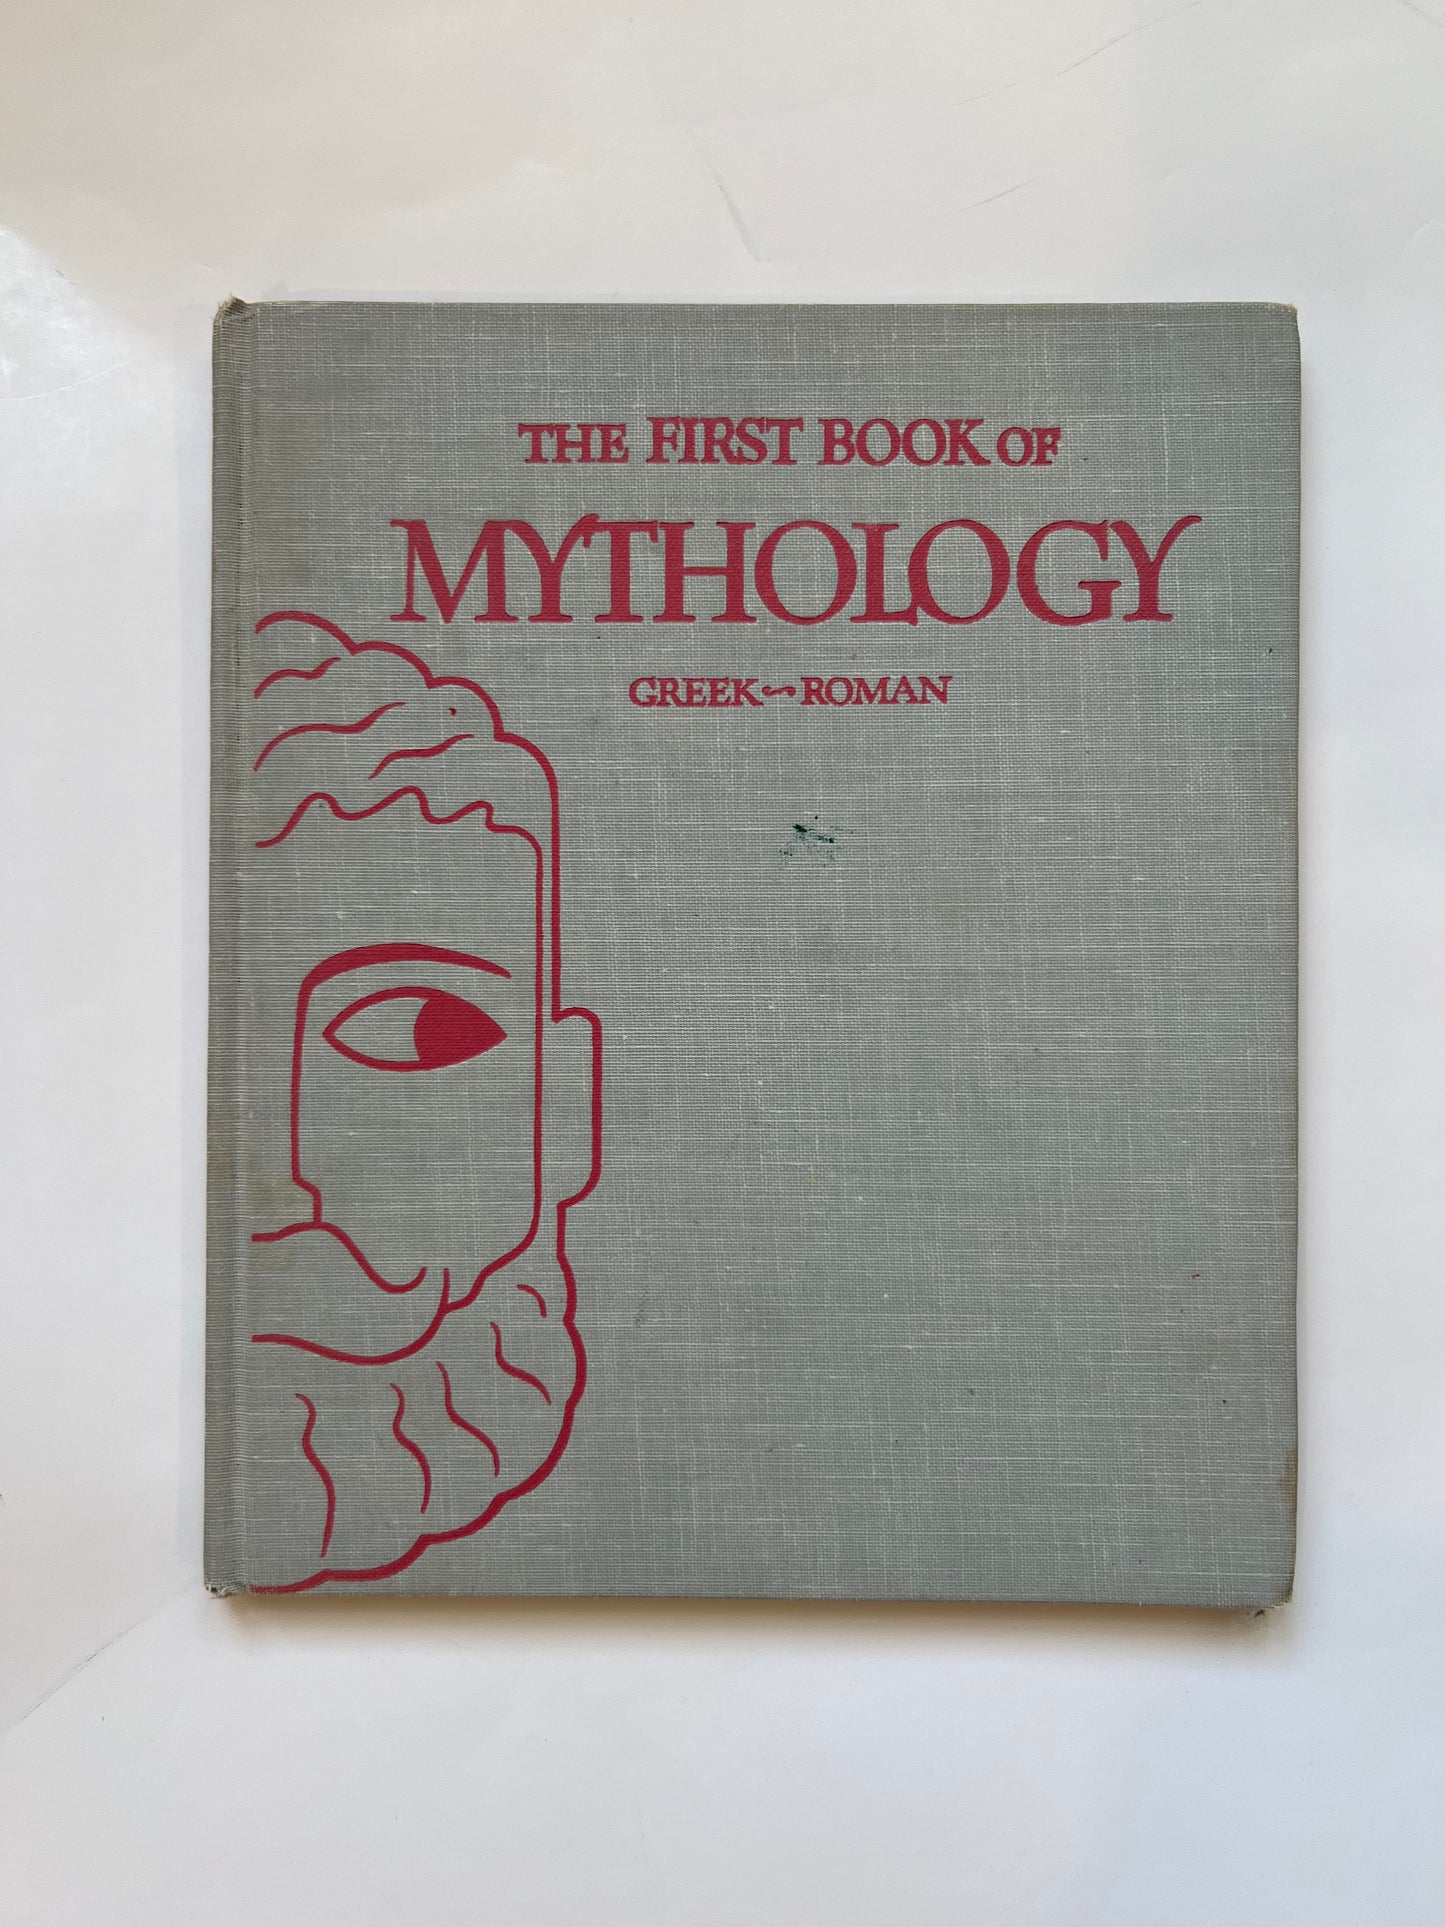 The First Book of Mythology